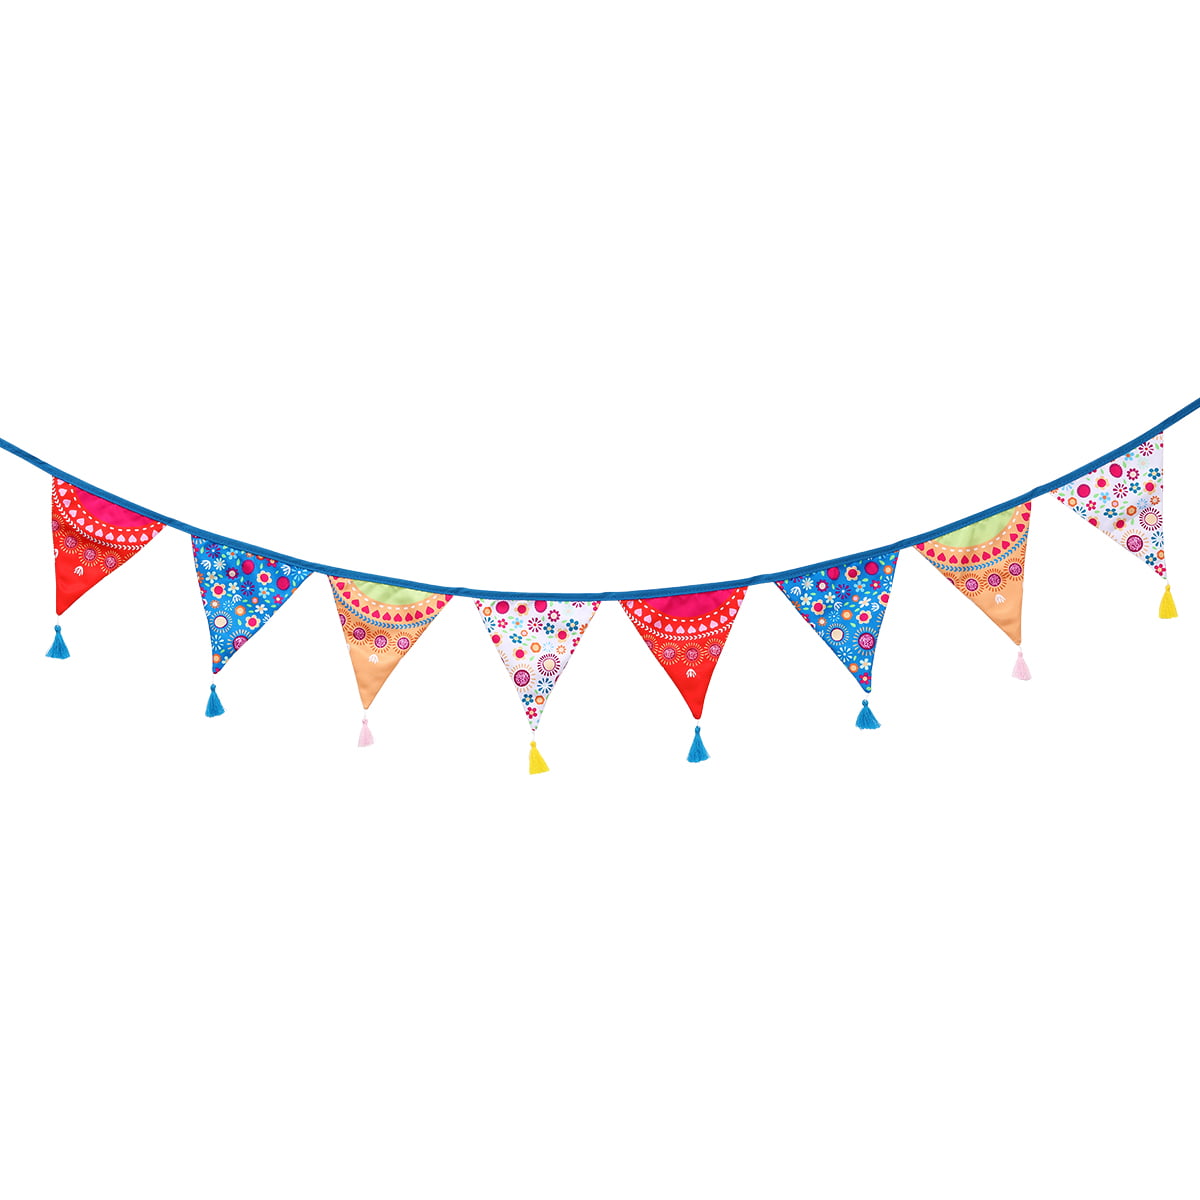 Canada Small Triangle Bunting 12 flags on this 5 meter Long Bunting 